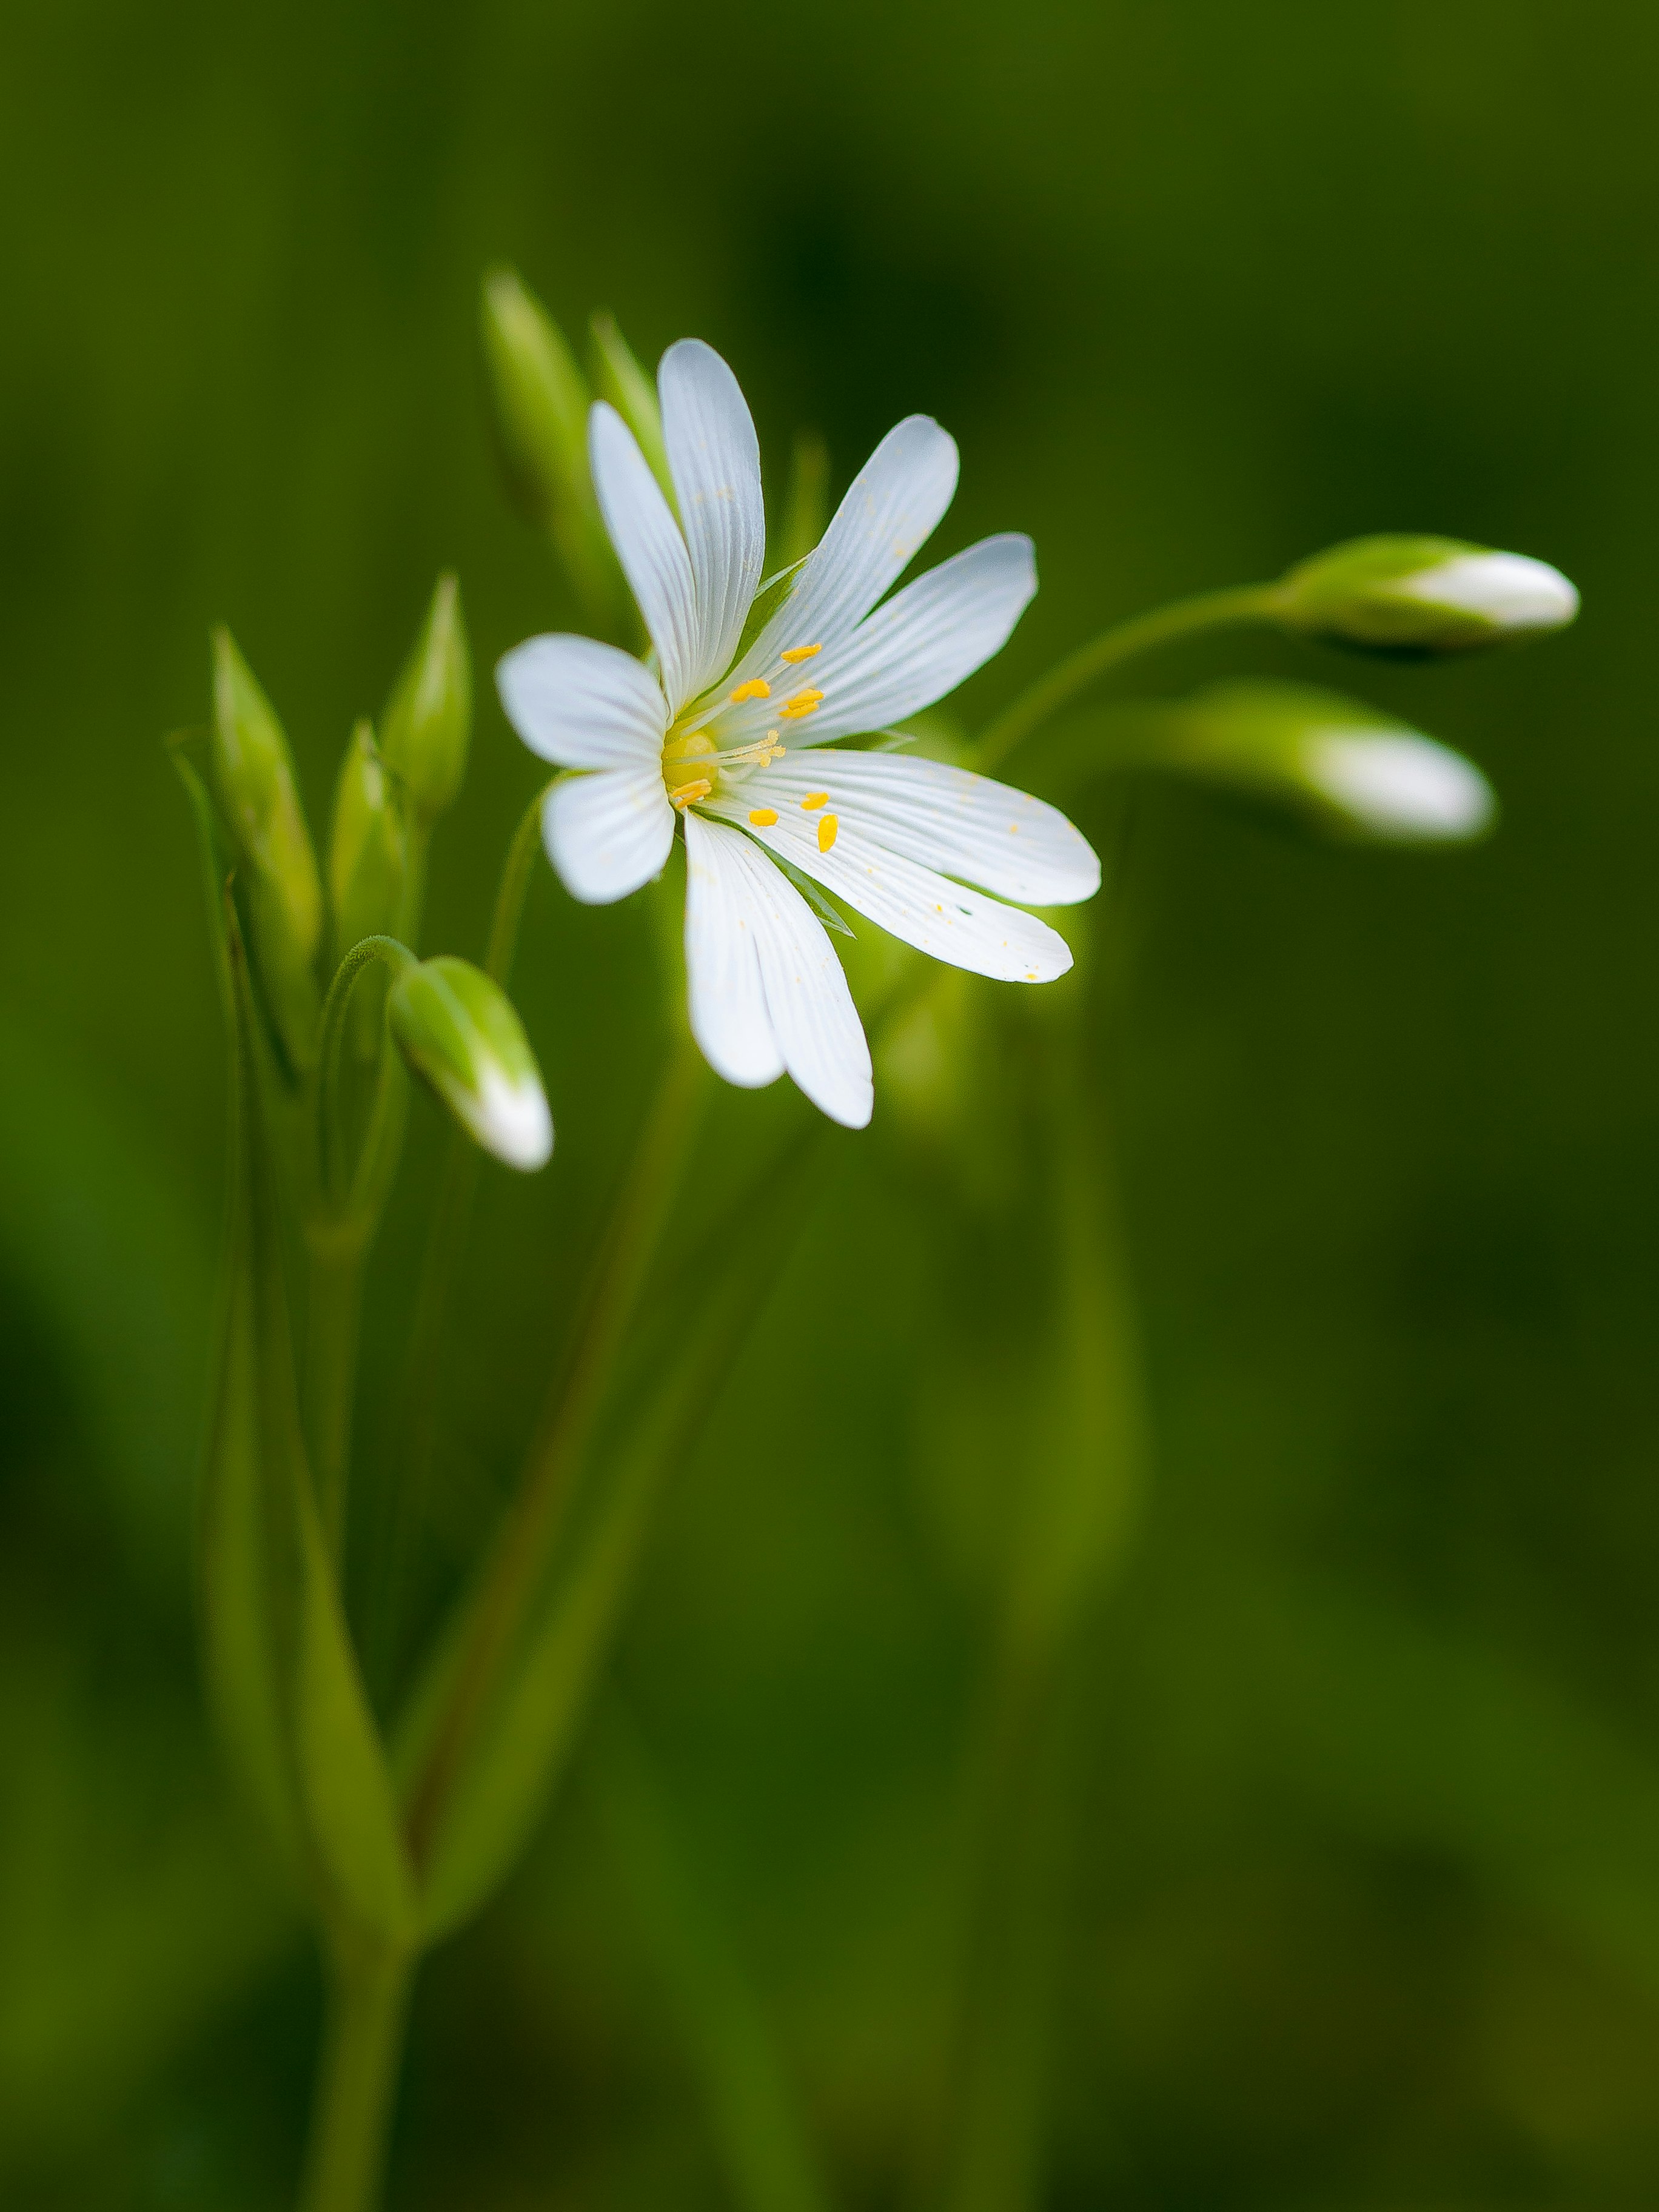 Lesser stitchwort flower by the side of the road at Isigny-le-Buat, Basse, Normandy, France